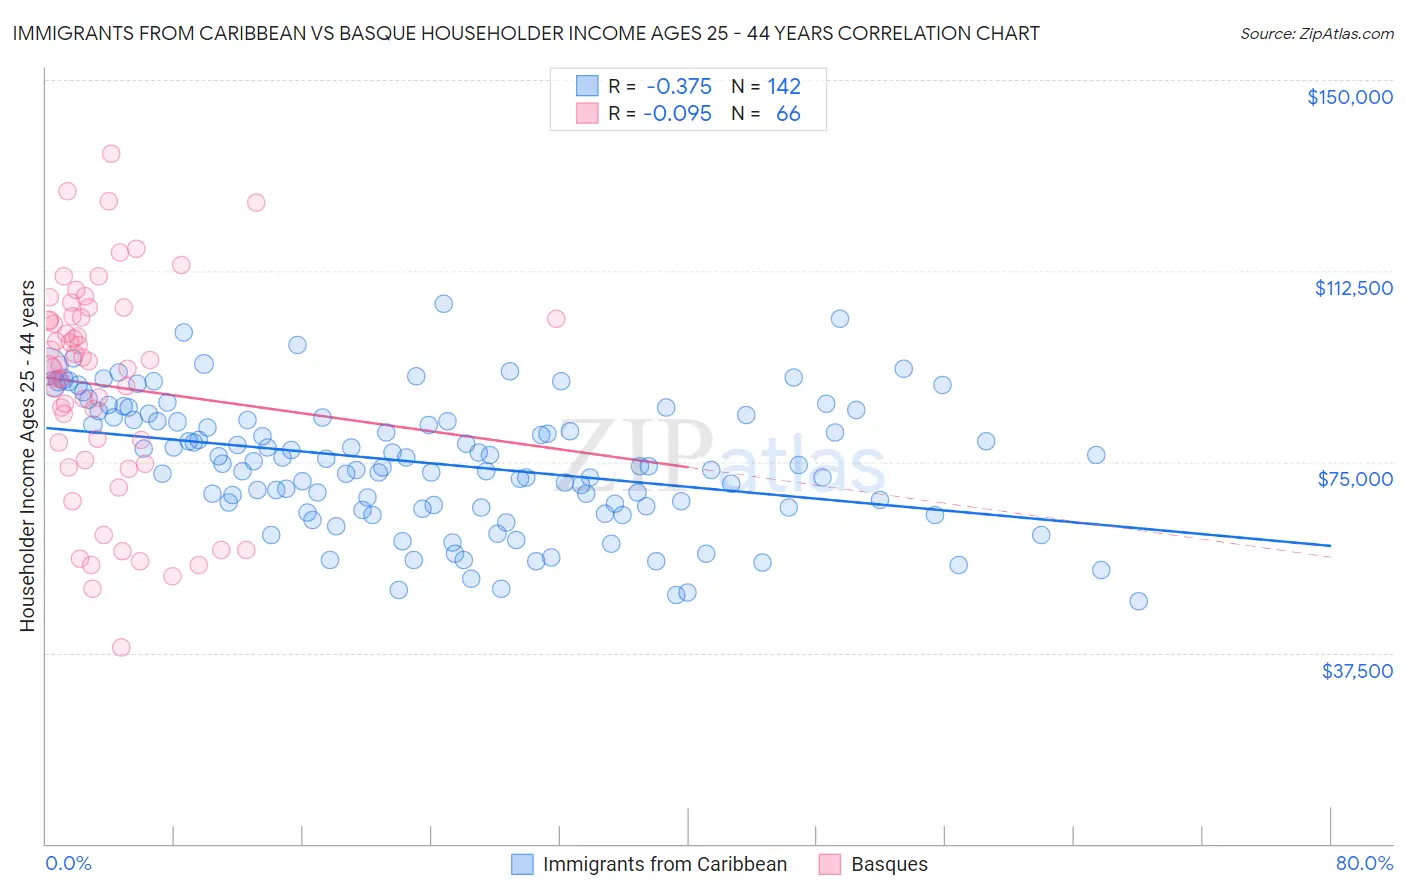 Immigrants from Caribbean vs Basque Householder Income Ages 25 - 44 years